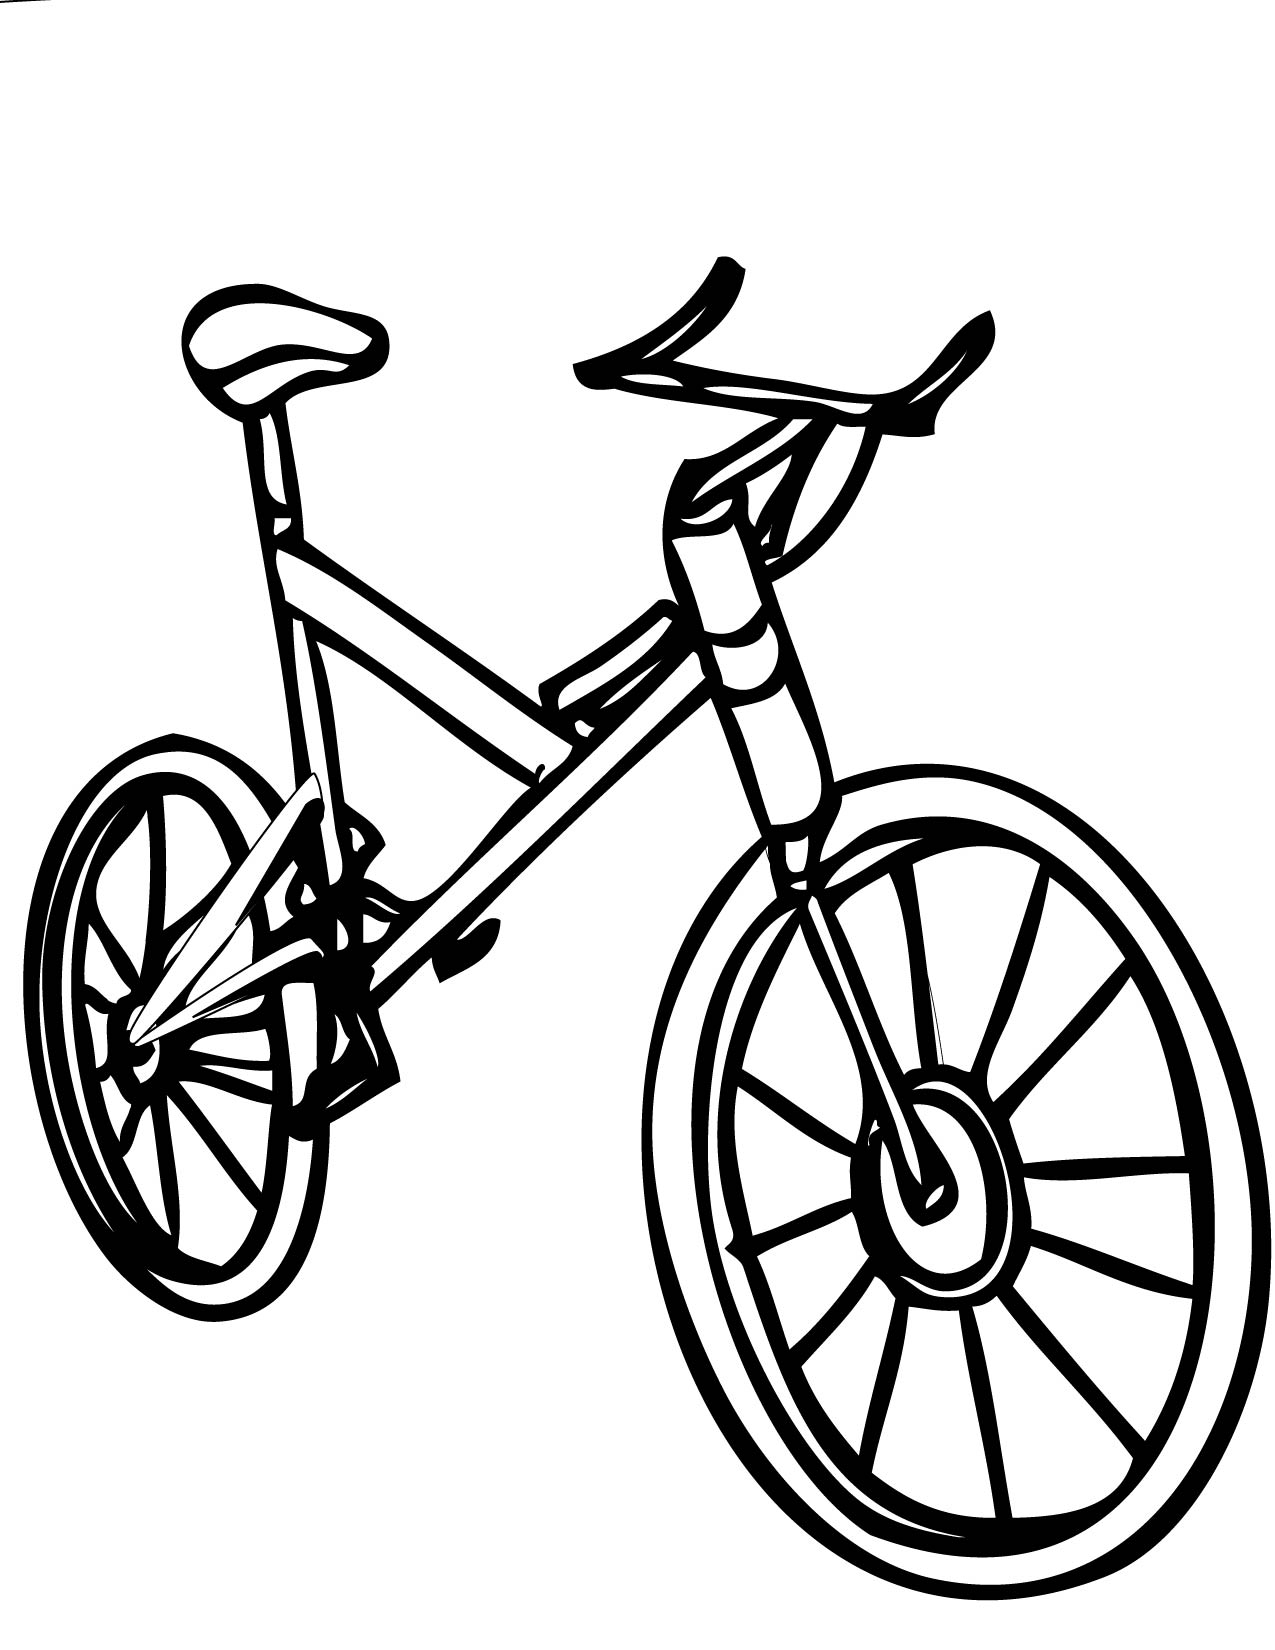 5 Best Images of Bicycle Coloring Printables Coloring Pages